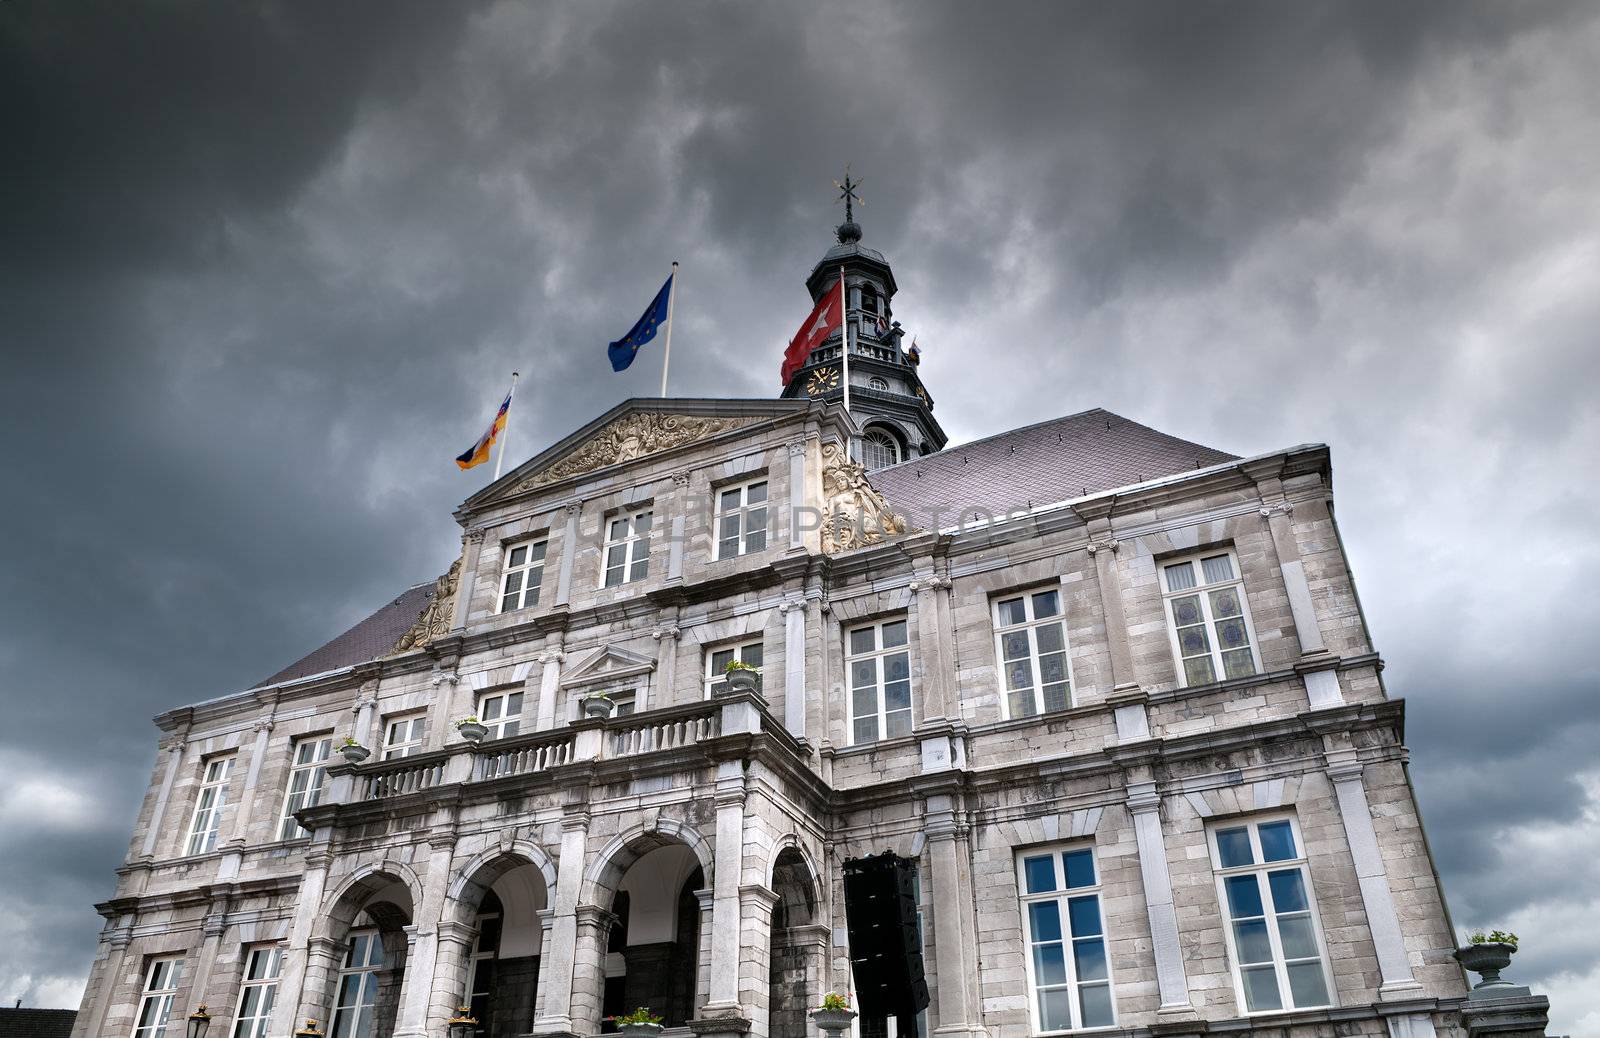 City Hall building in Maastricht, Netherlands